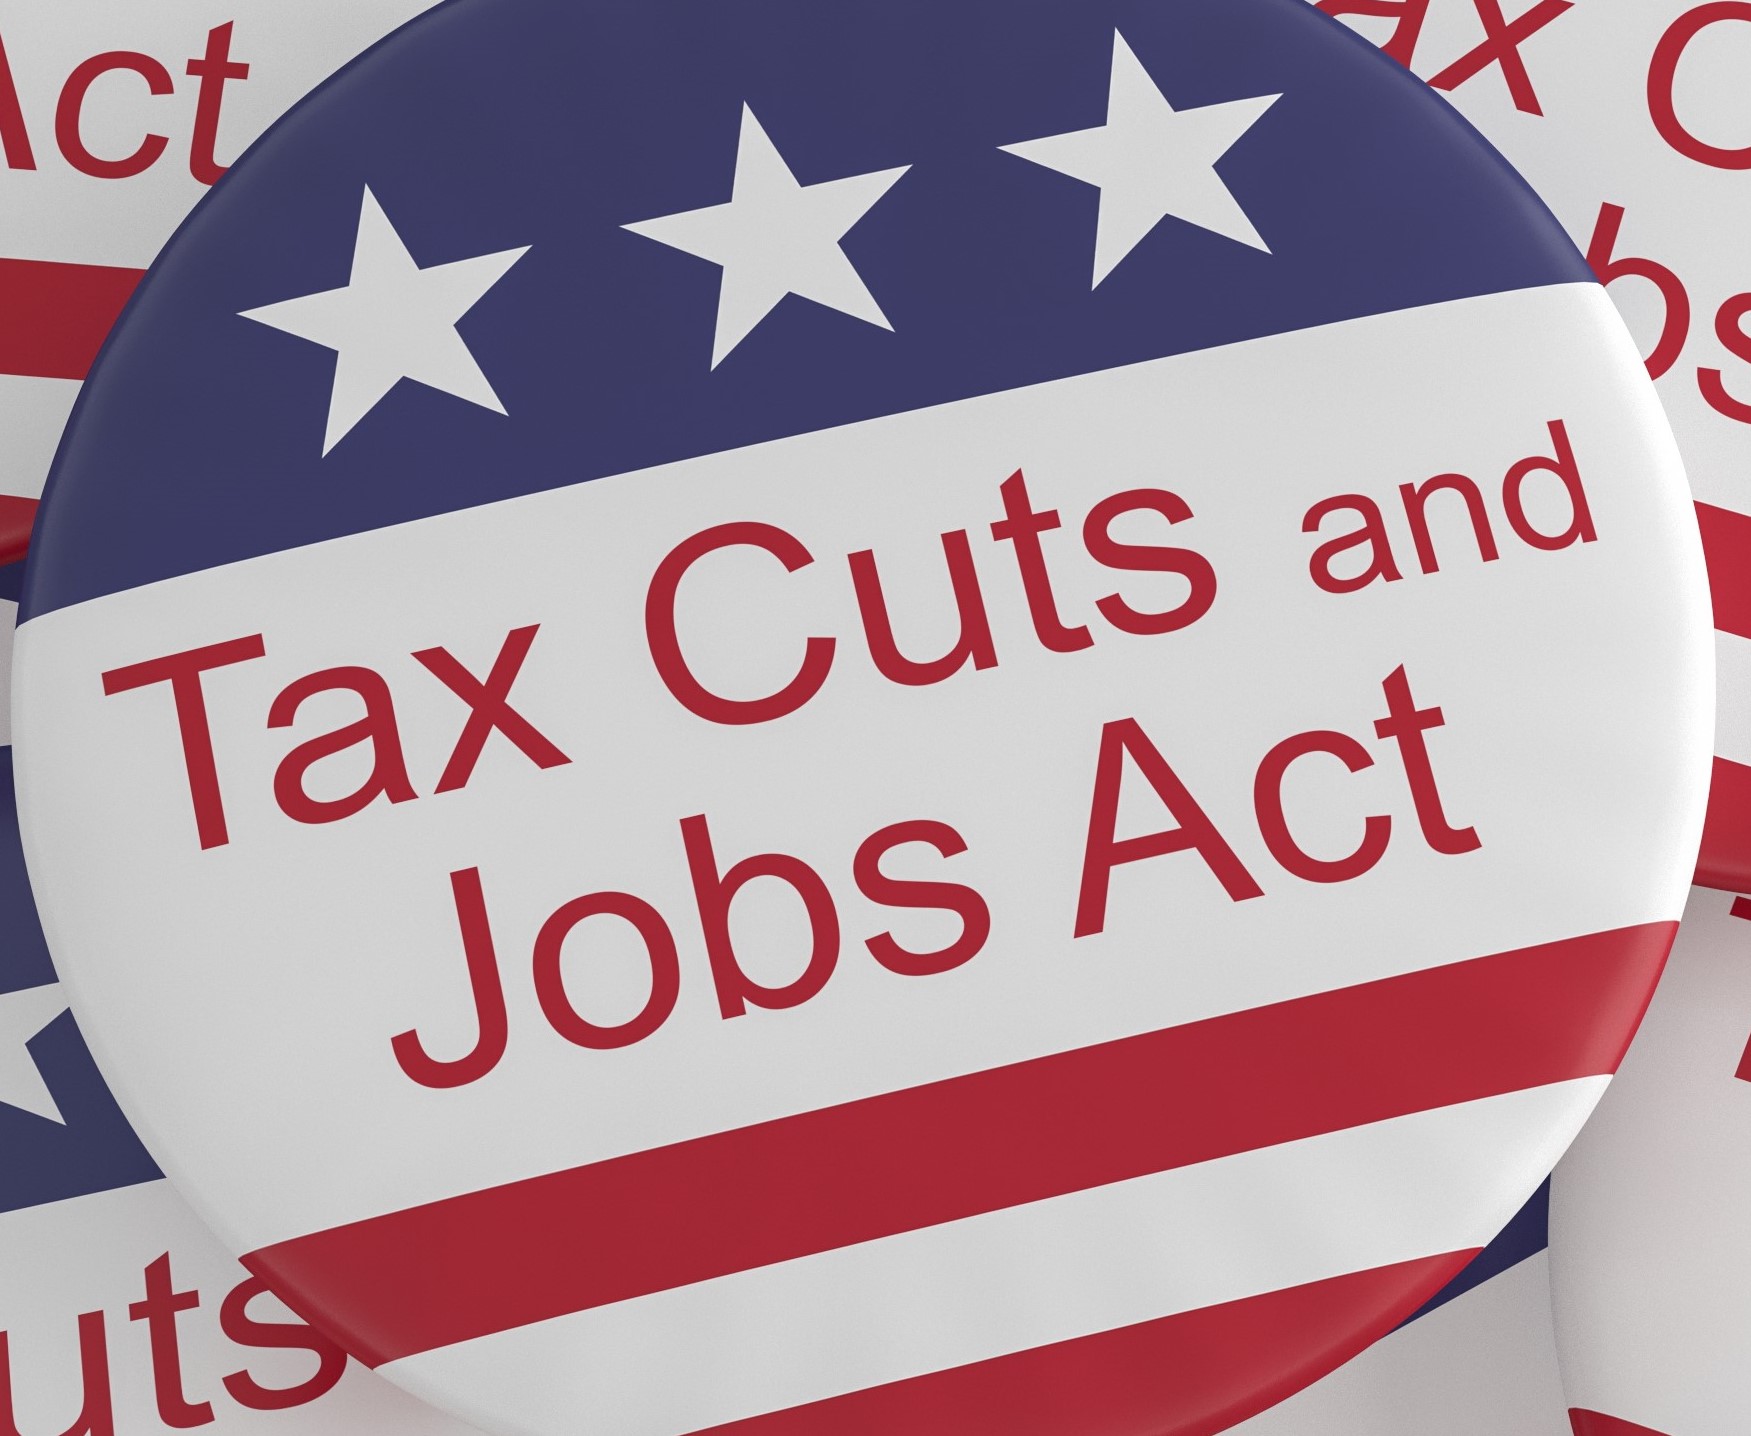 Yes, the 2017 Tax Cuts and Jobs Act worked.